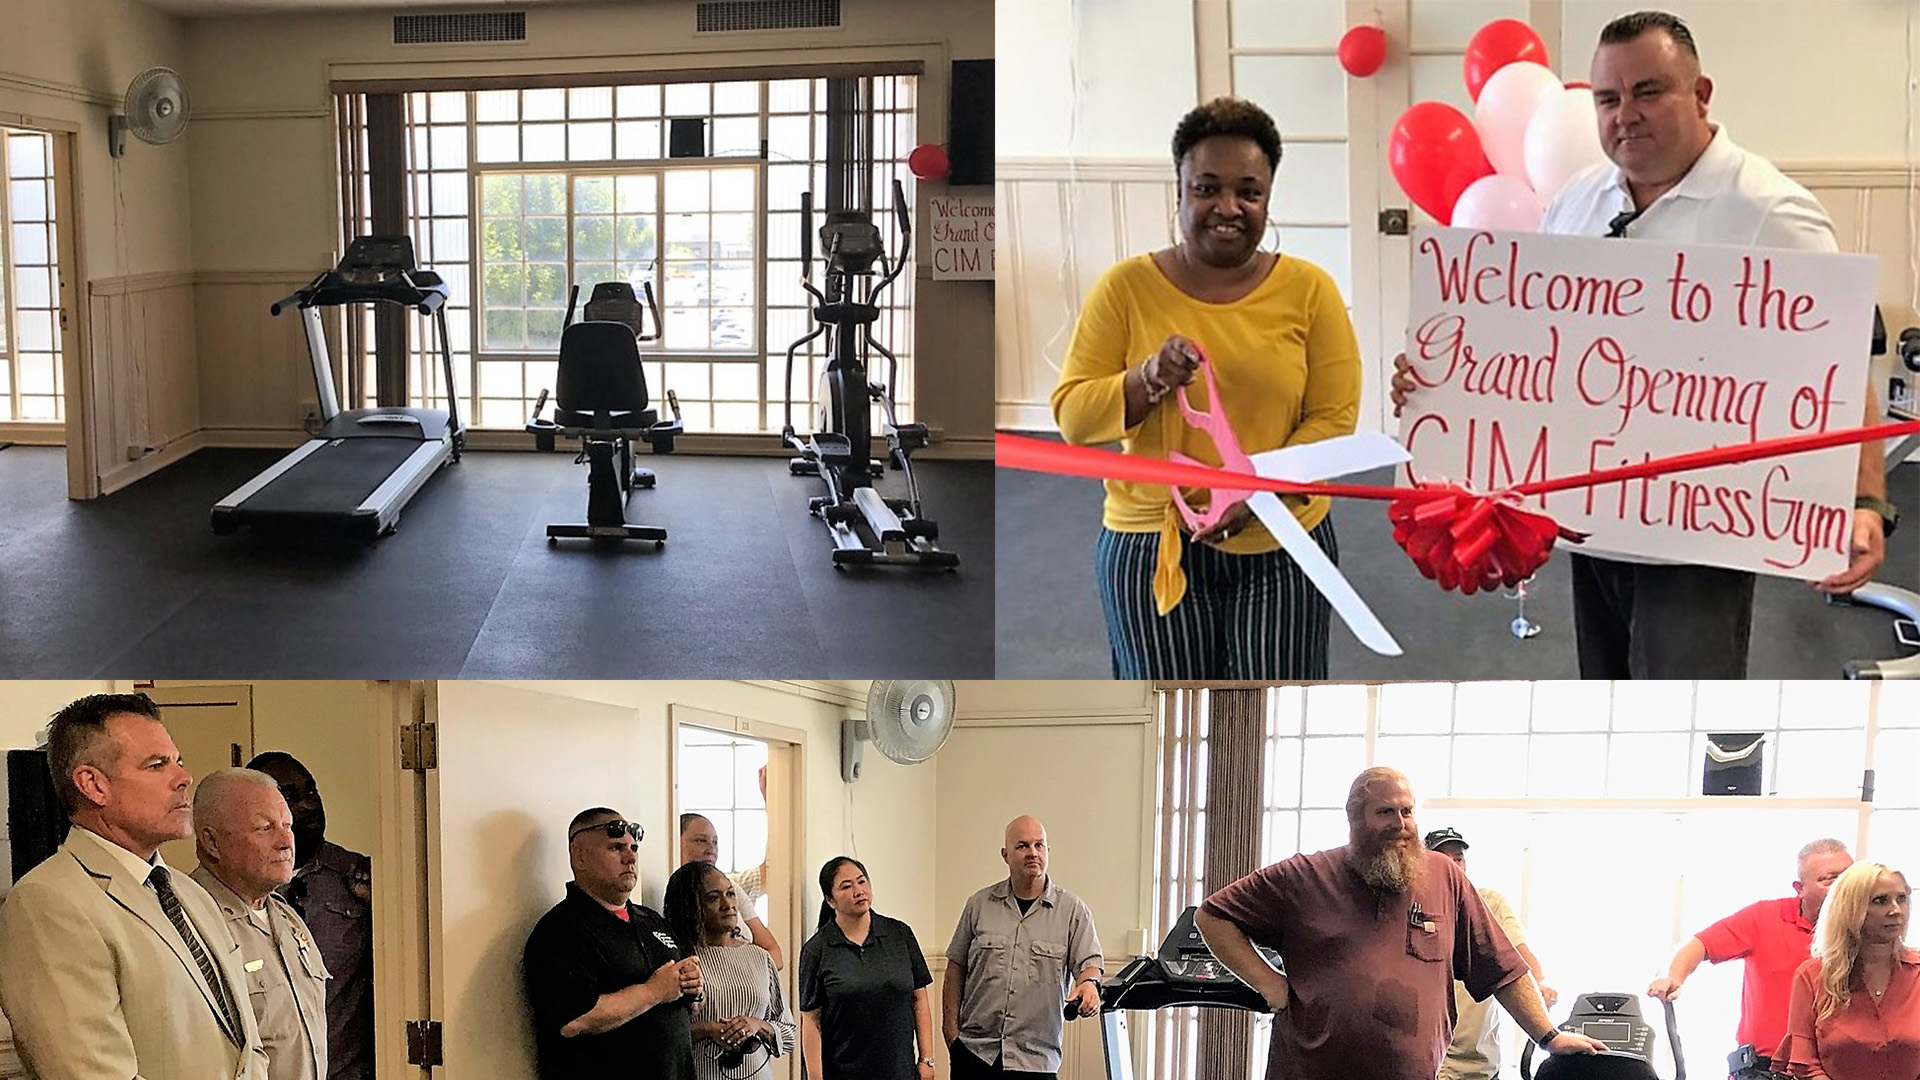 A collage of photos showing gym equipment, a woman holding large scissors ready to cut a red ribbon, a man holding a sign welcoming everyone to a grand opening of the new CIM fitness center and a photo of men and women gathered to watch.